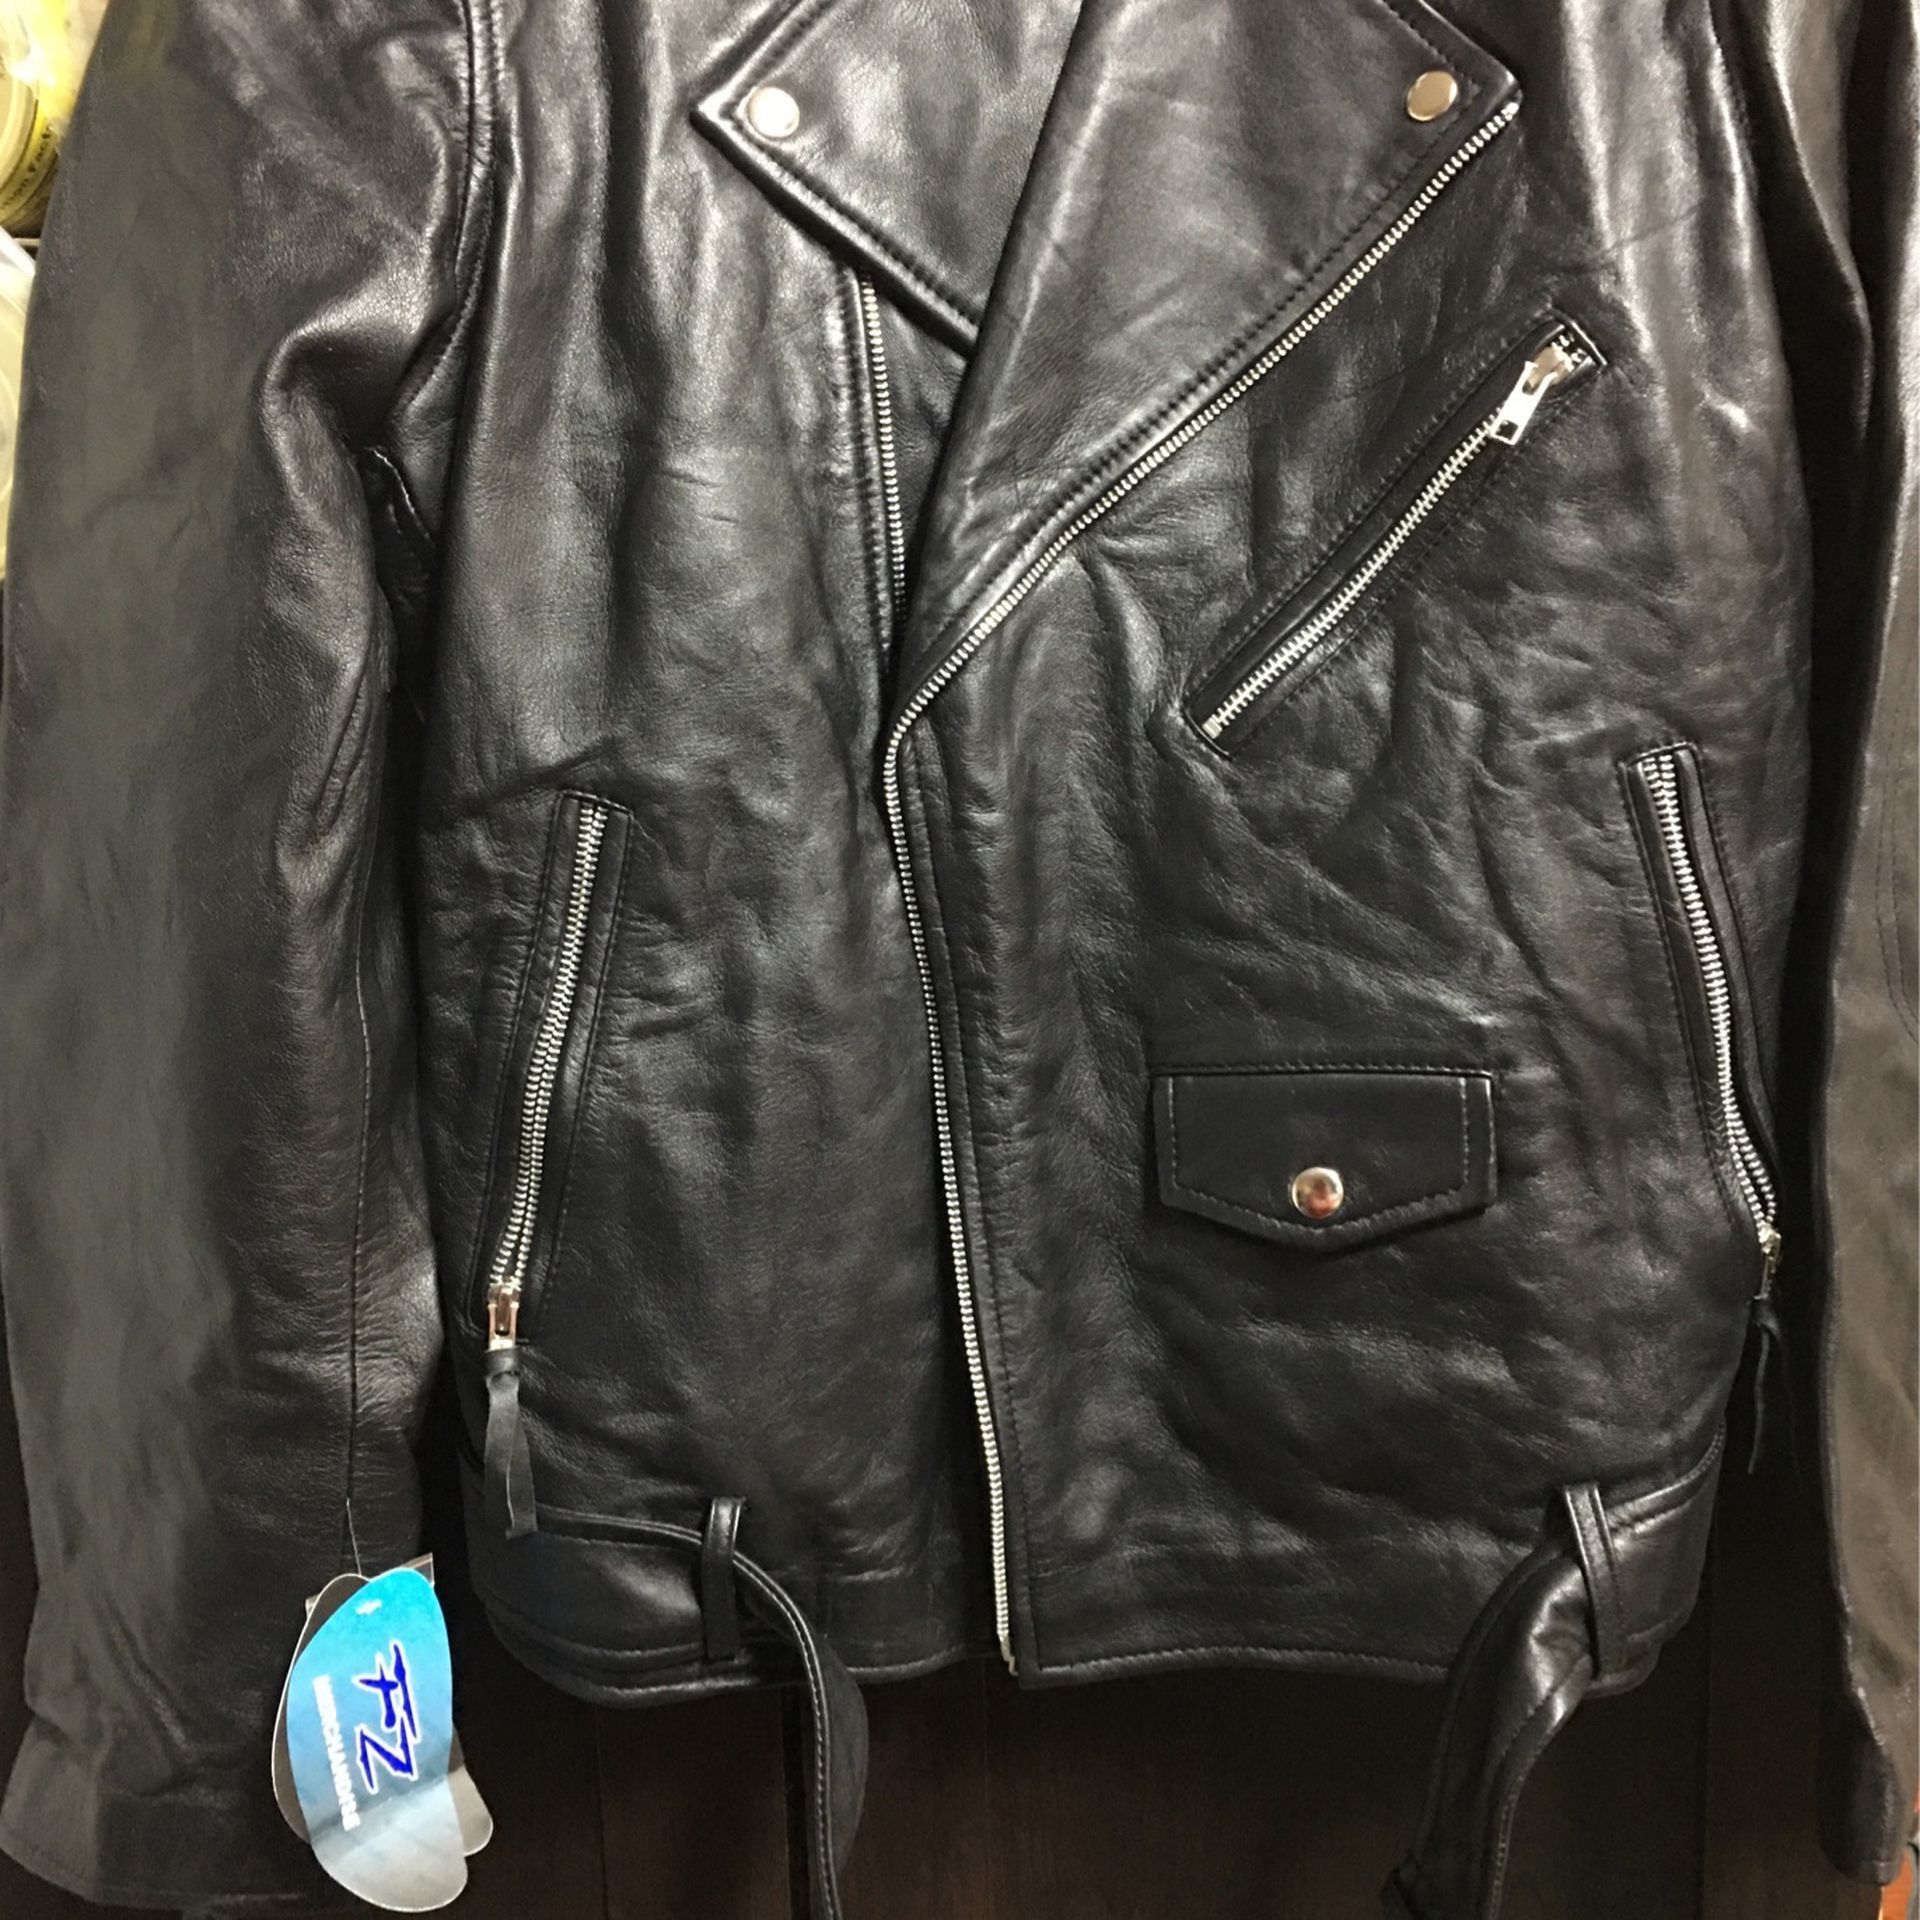 Lather Jacket Brand New With Tag $65 Original Price $200